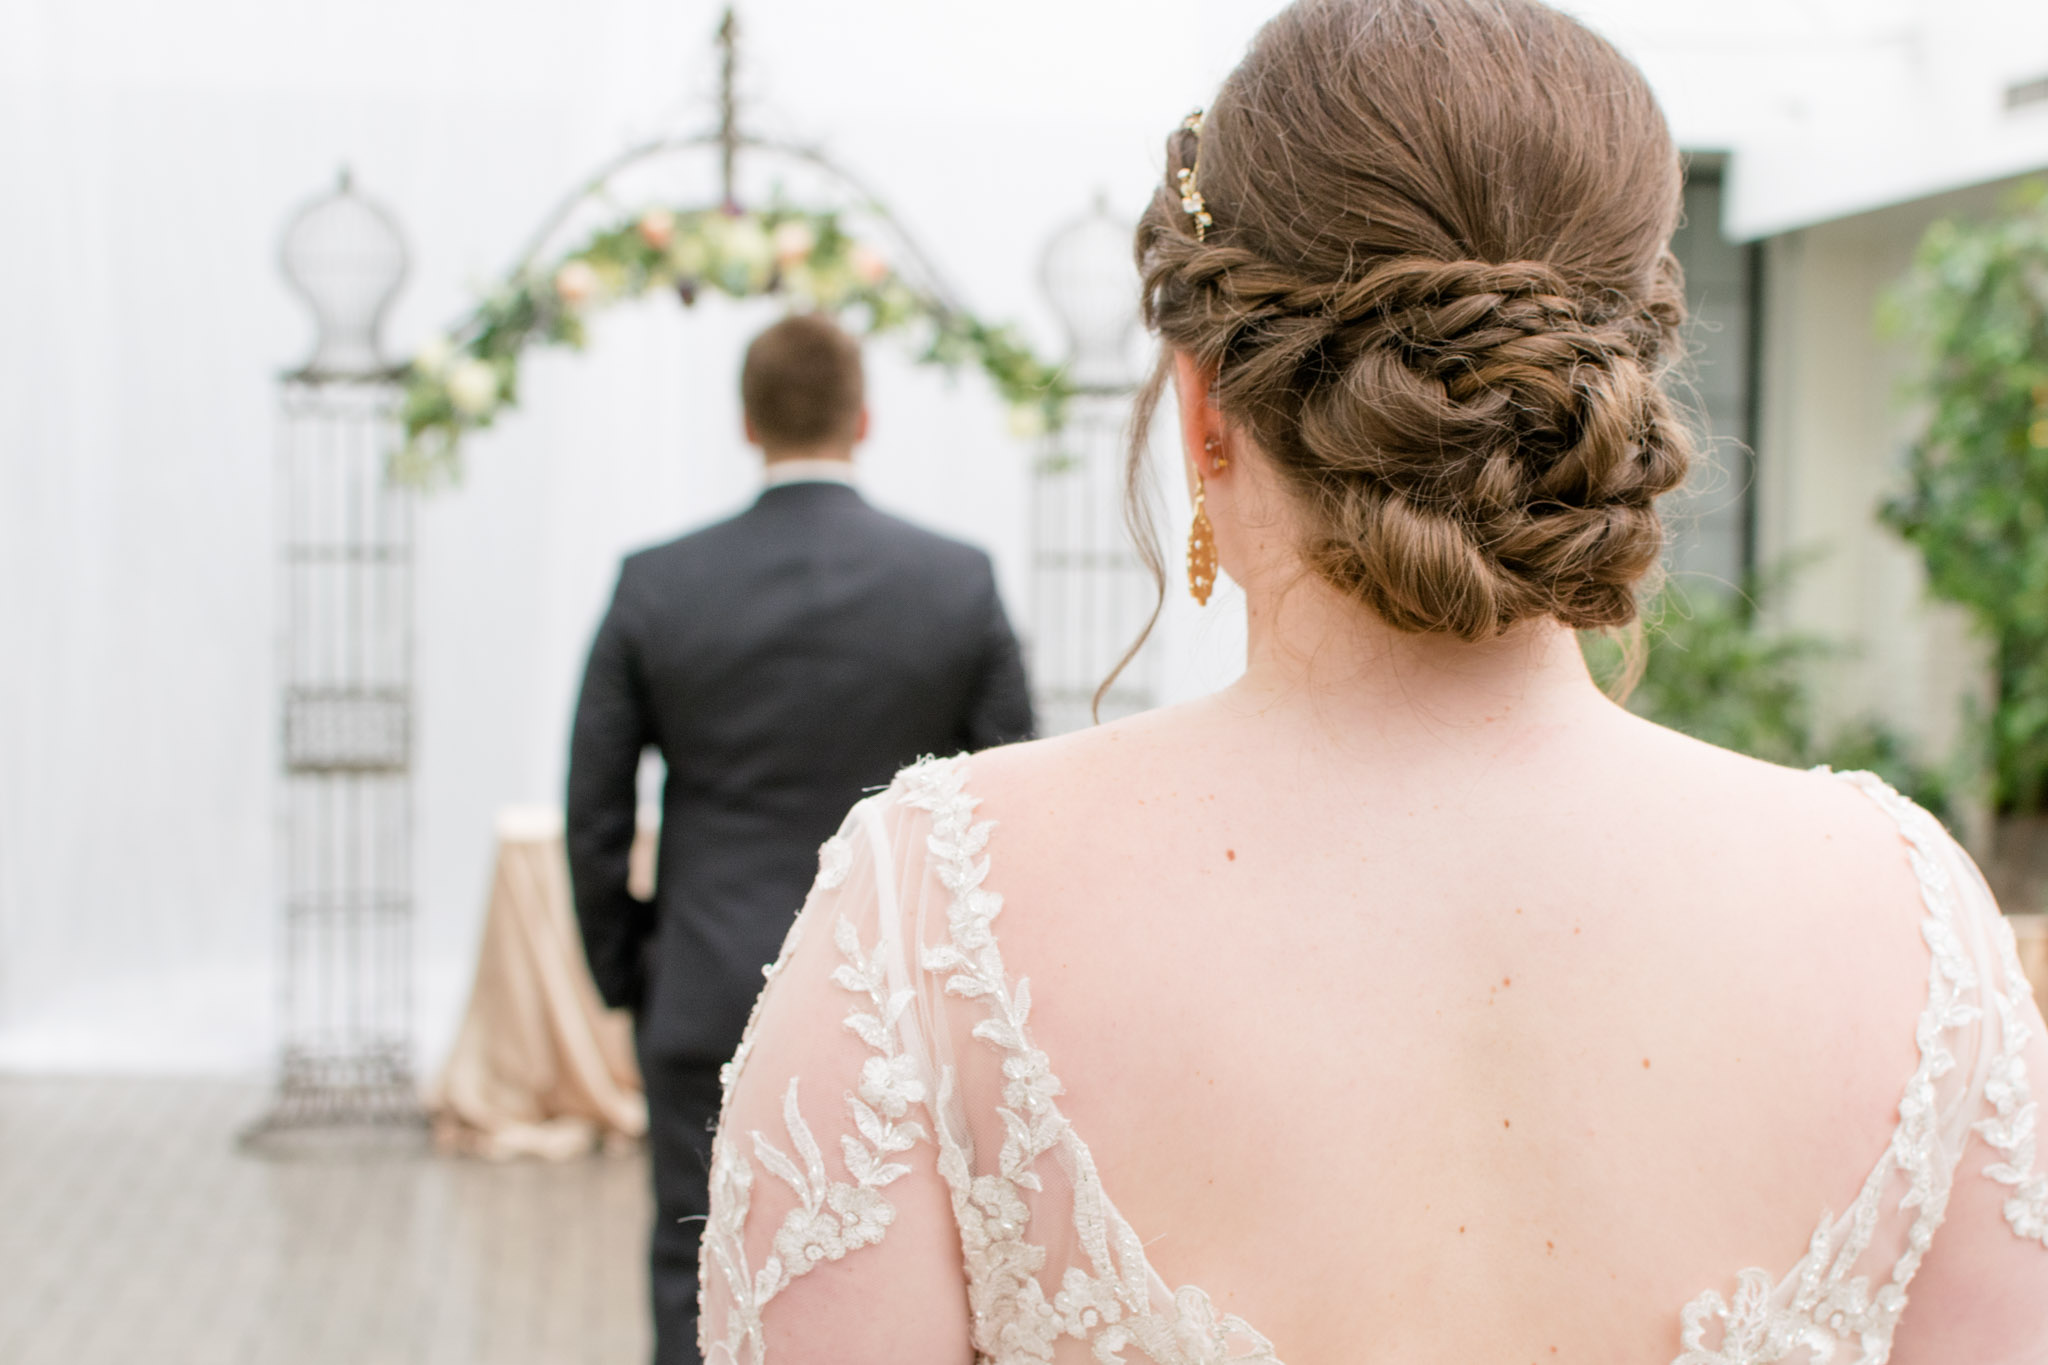 Bride waits to see groom during first look